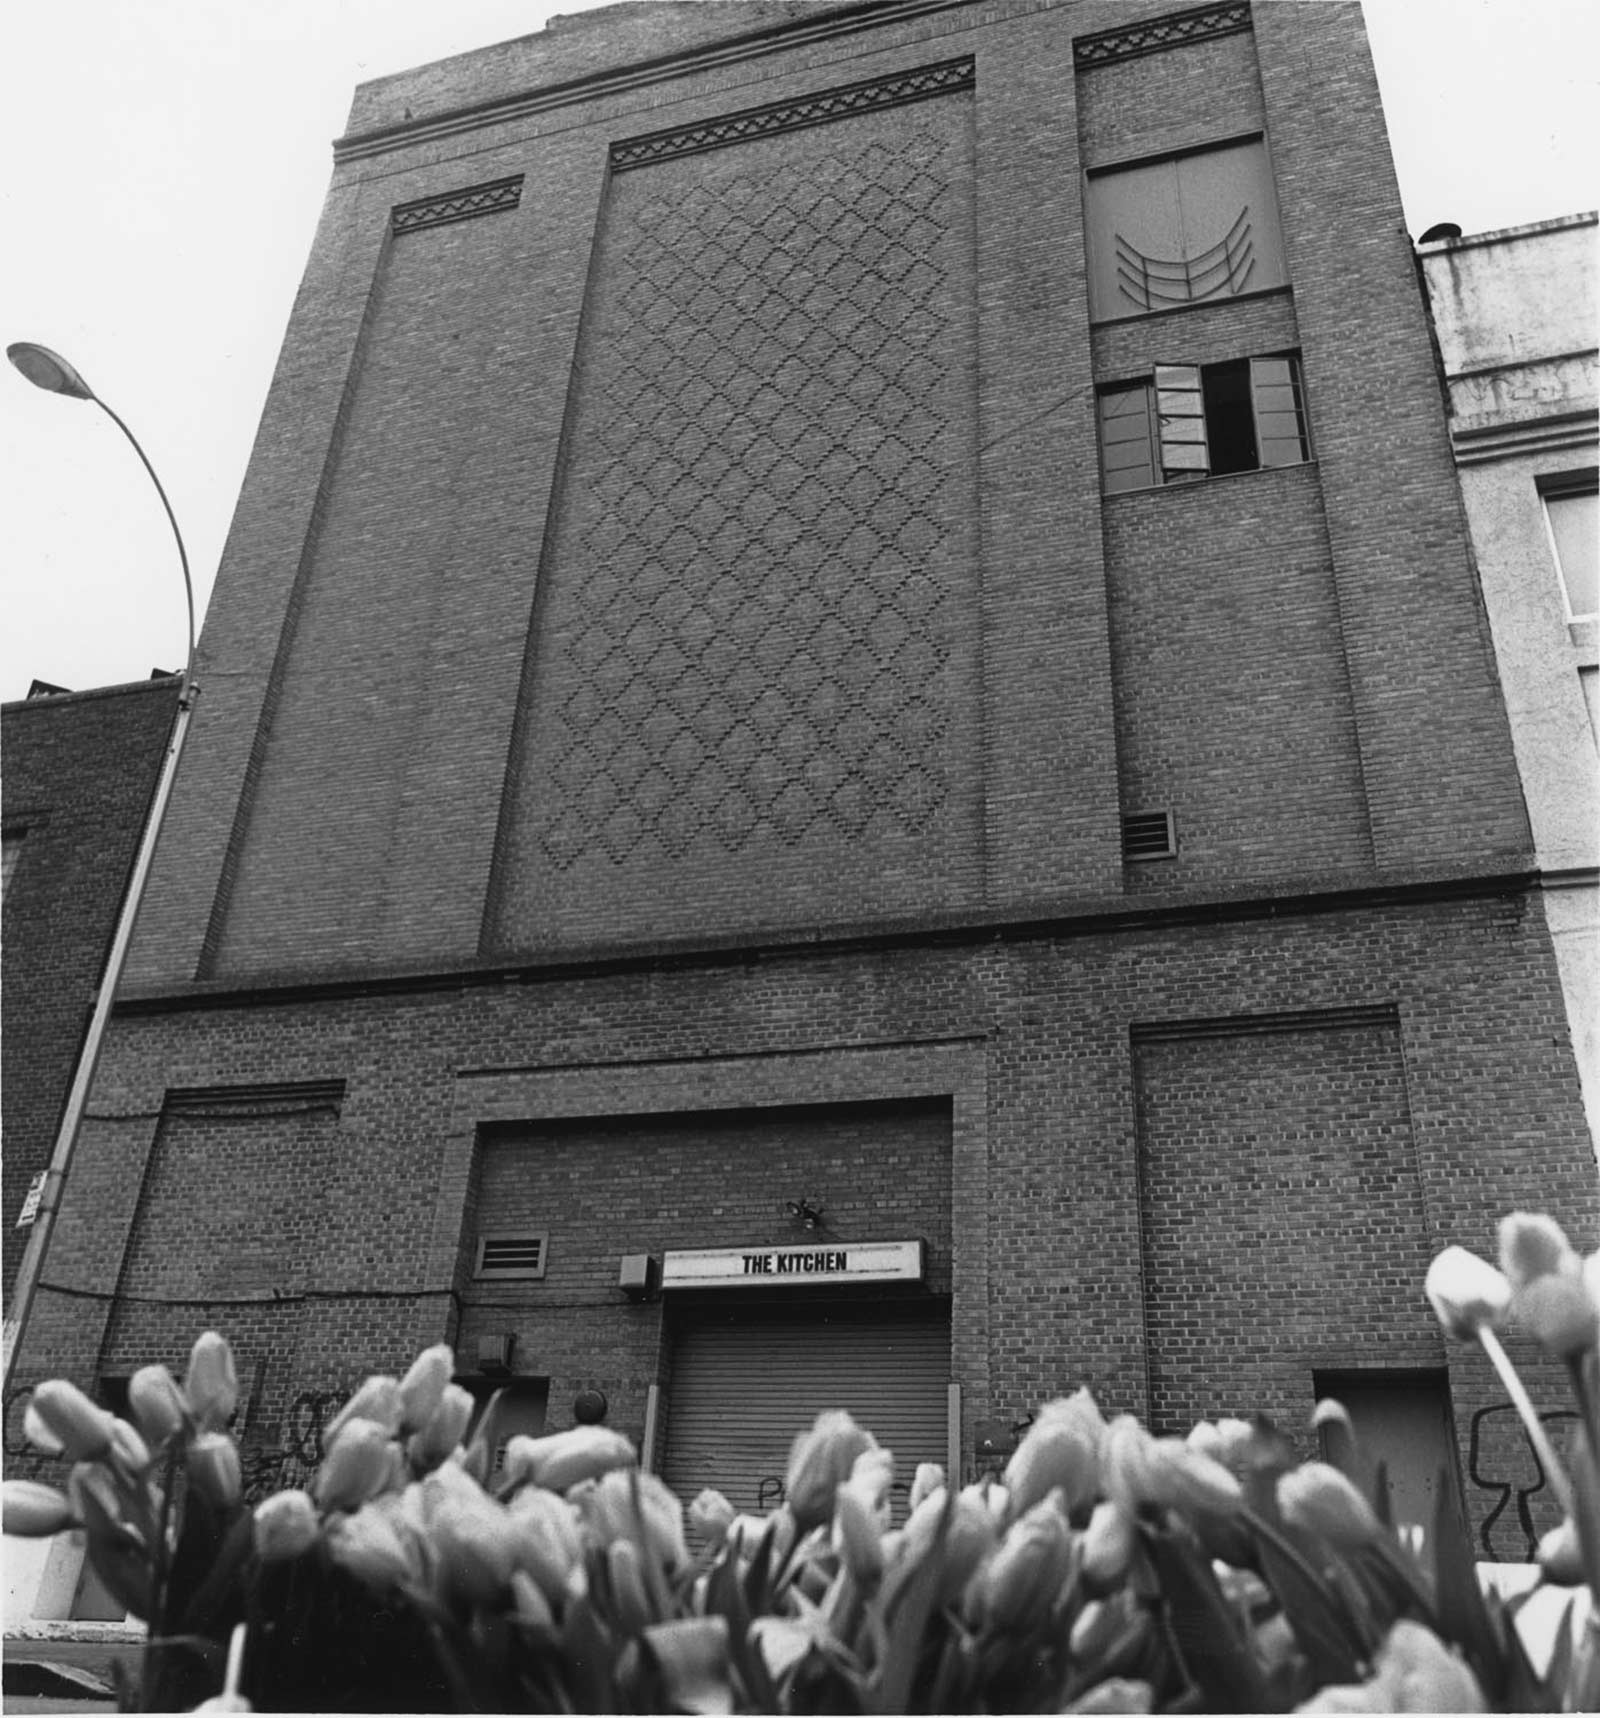 Figure 1. Facade of The Kitchen, 512 West 19th Street, New York, New York. Date unknown (ca. late 1980s). Photographer unknown. Courtesy of The Kitchen.